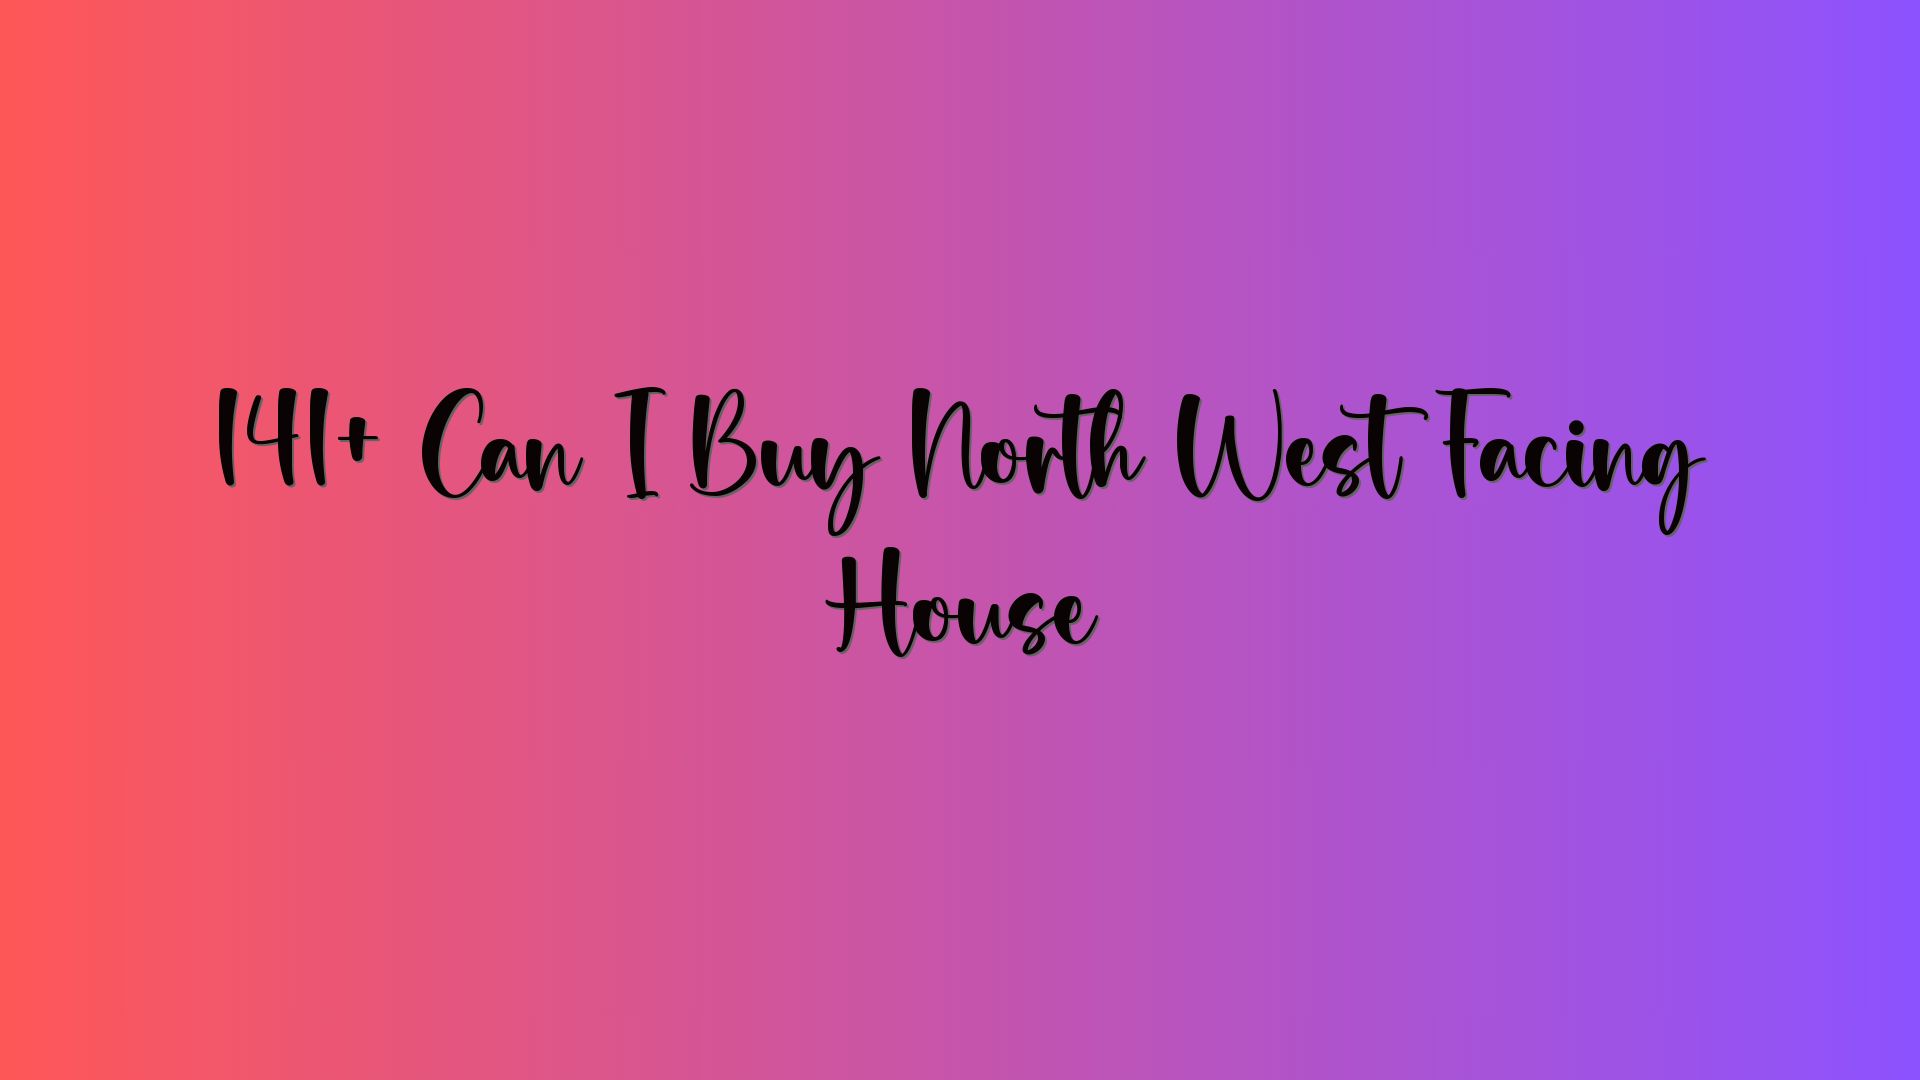 141+ Can I Buy North West Facing House